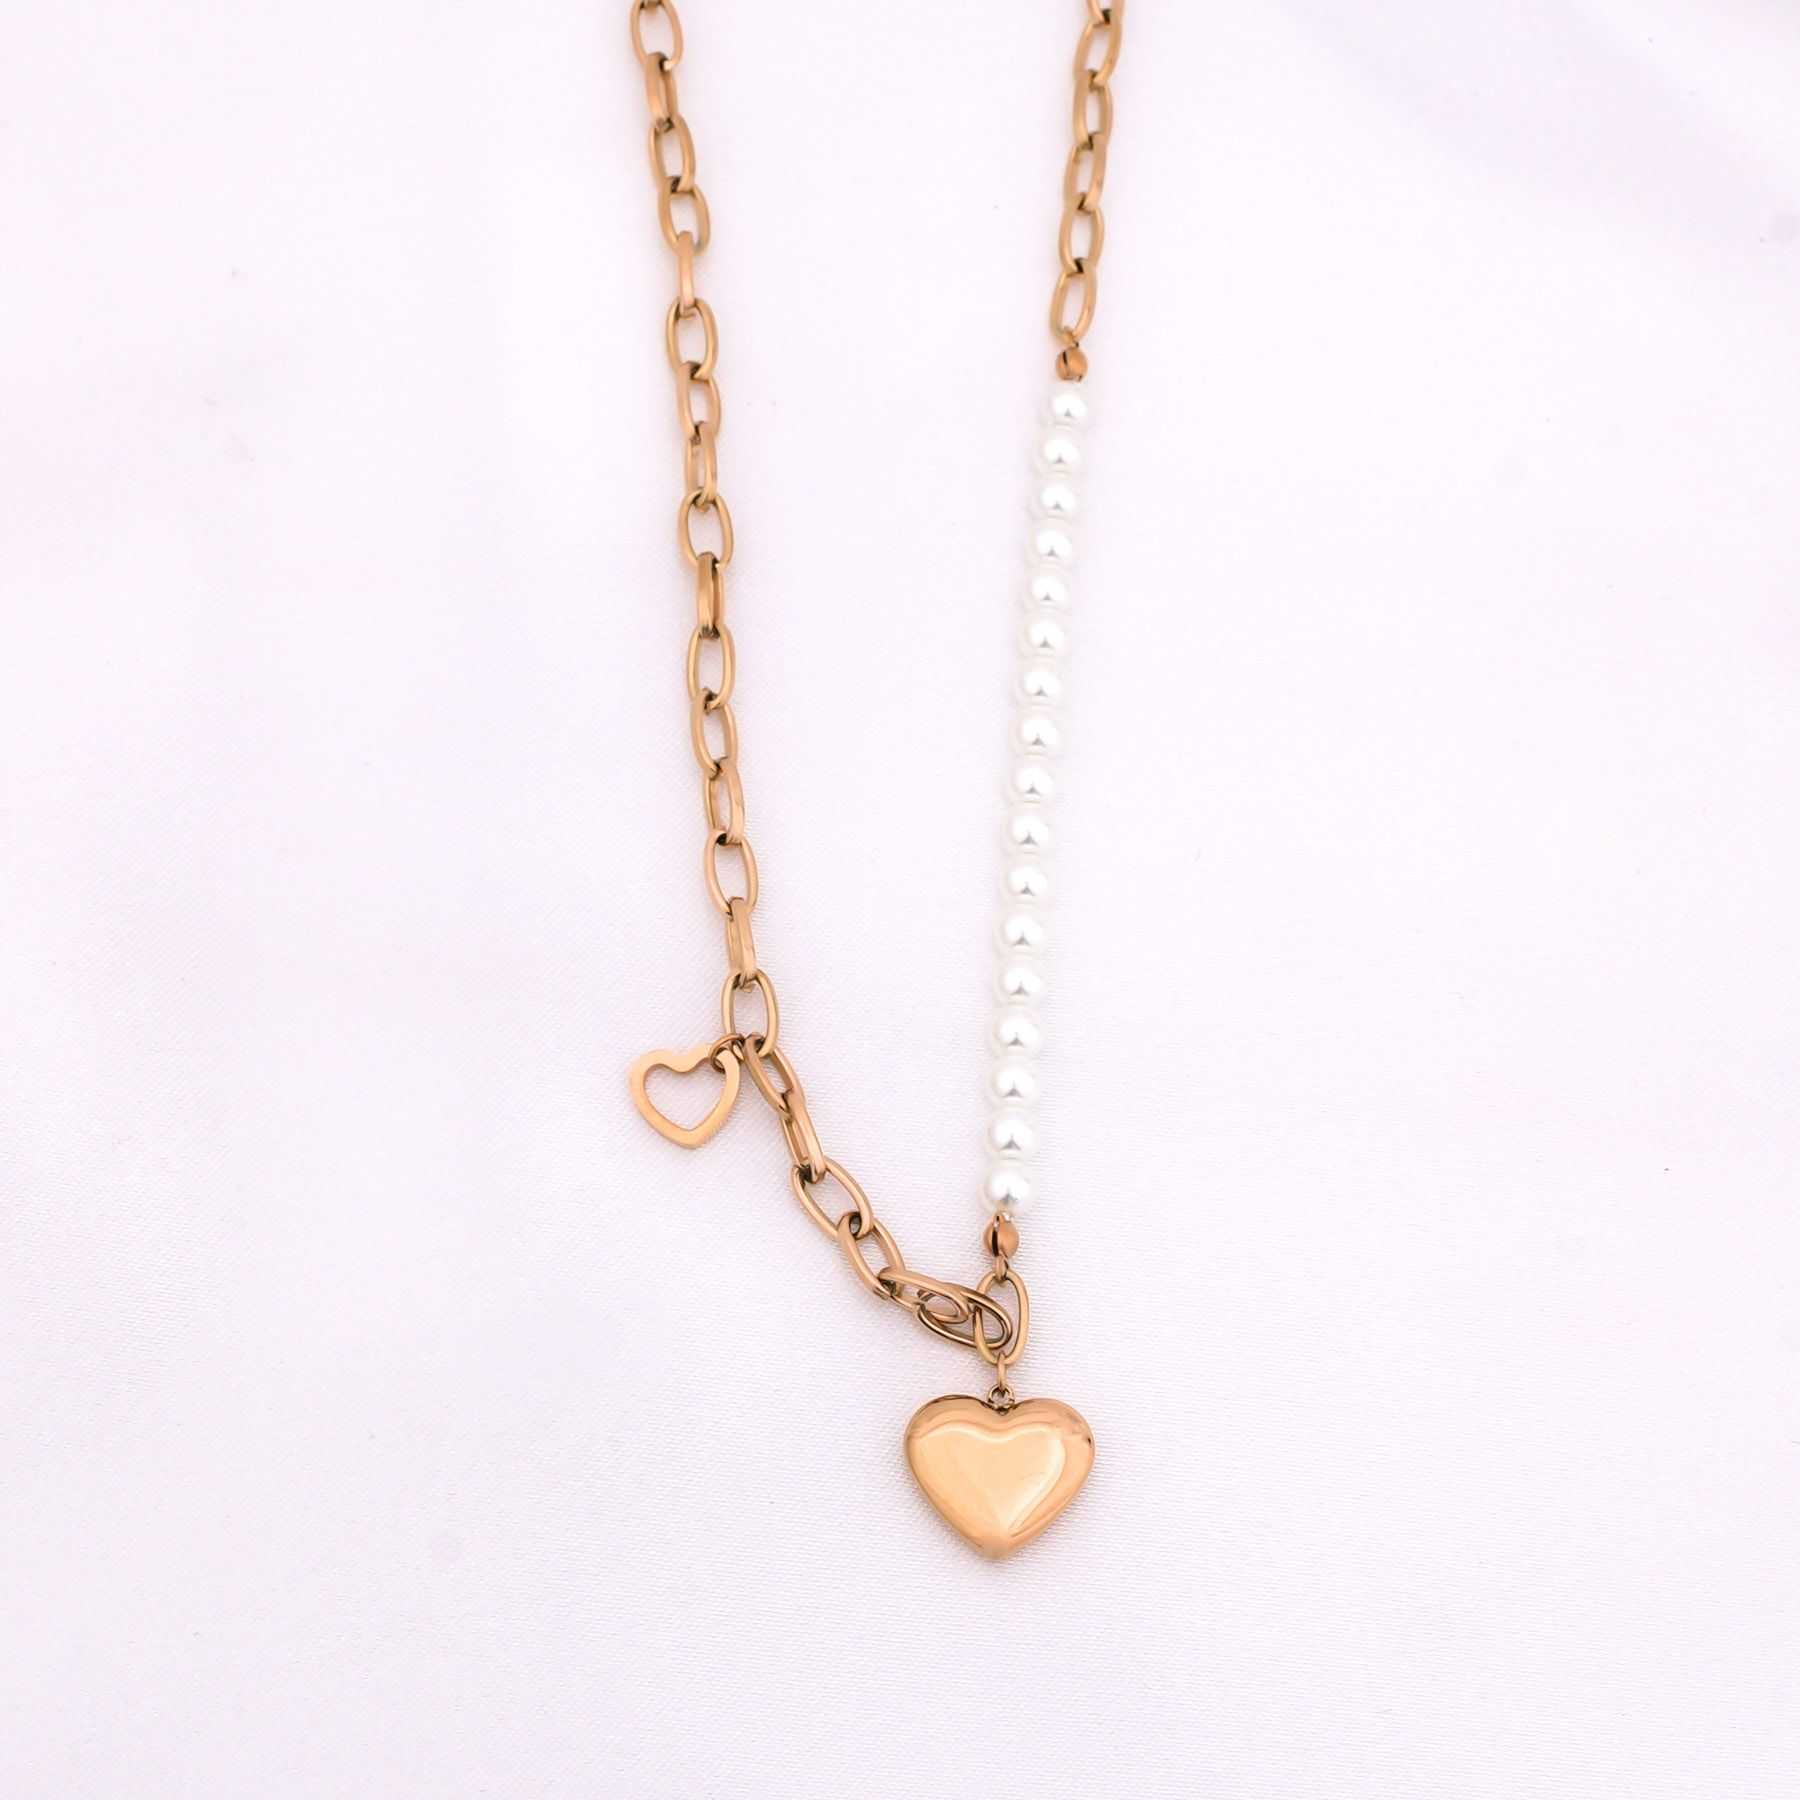 HEART AND SOUL NECKLACE - ROSE GOLD